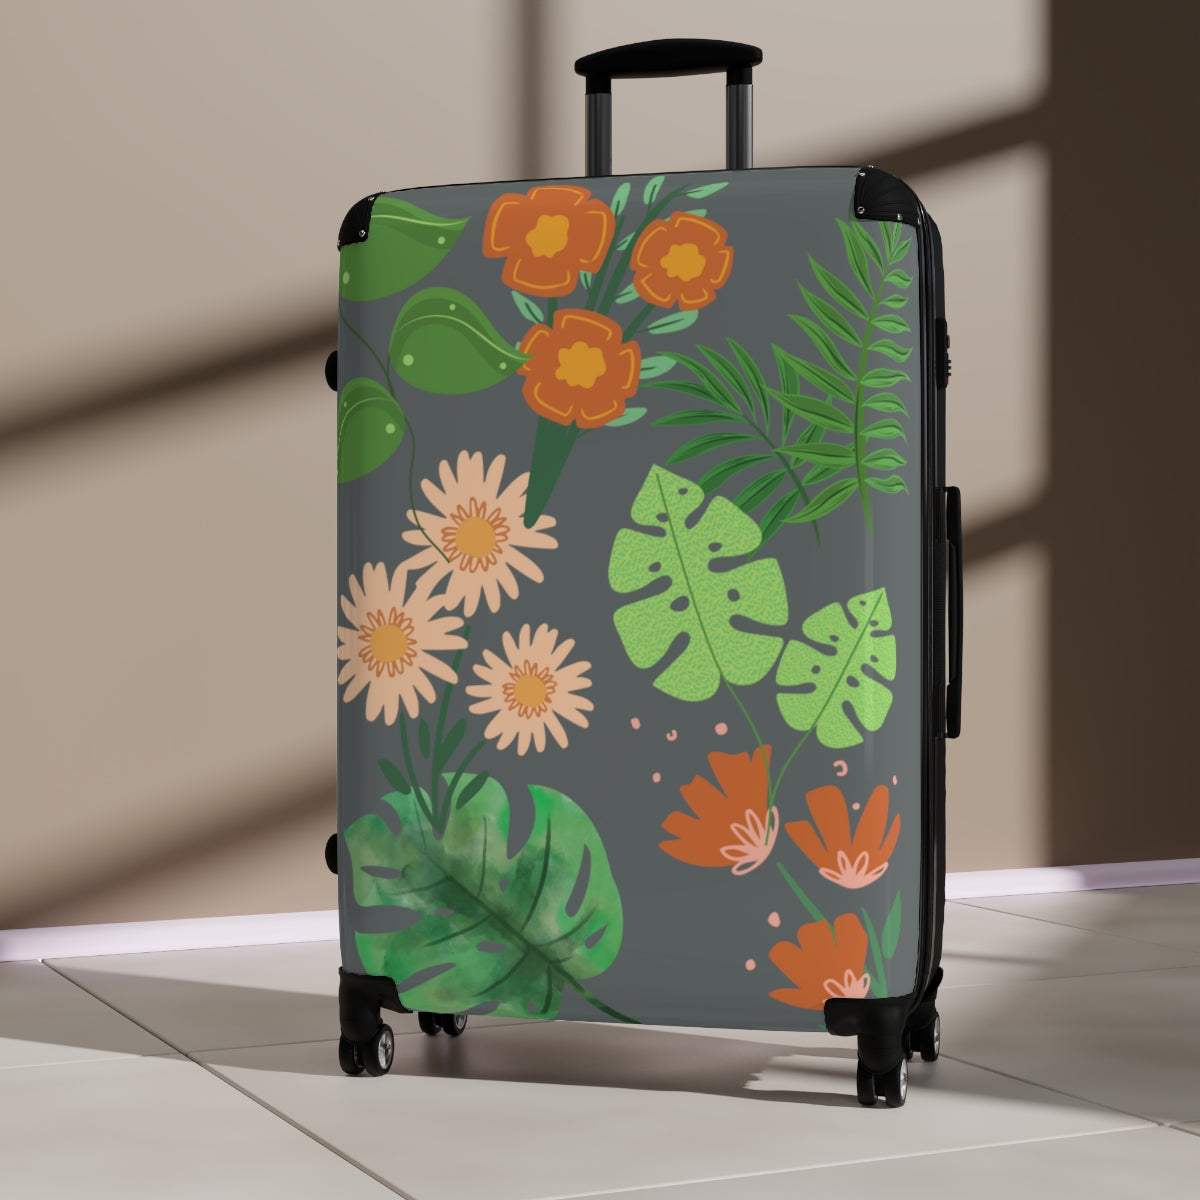 BEST CARRY-ON LUGGAGE SET, TROPICAL SUMMER DESIGN BY ARTZIRA, FLORAL CABIN SUITCASE FOR GIRLS, WOMEN, GIFT FOR BRIDESMAIDS, GIFT FOR MOTHERS, DOUBLE WHEELED SPINNER